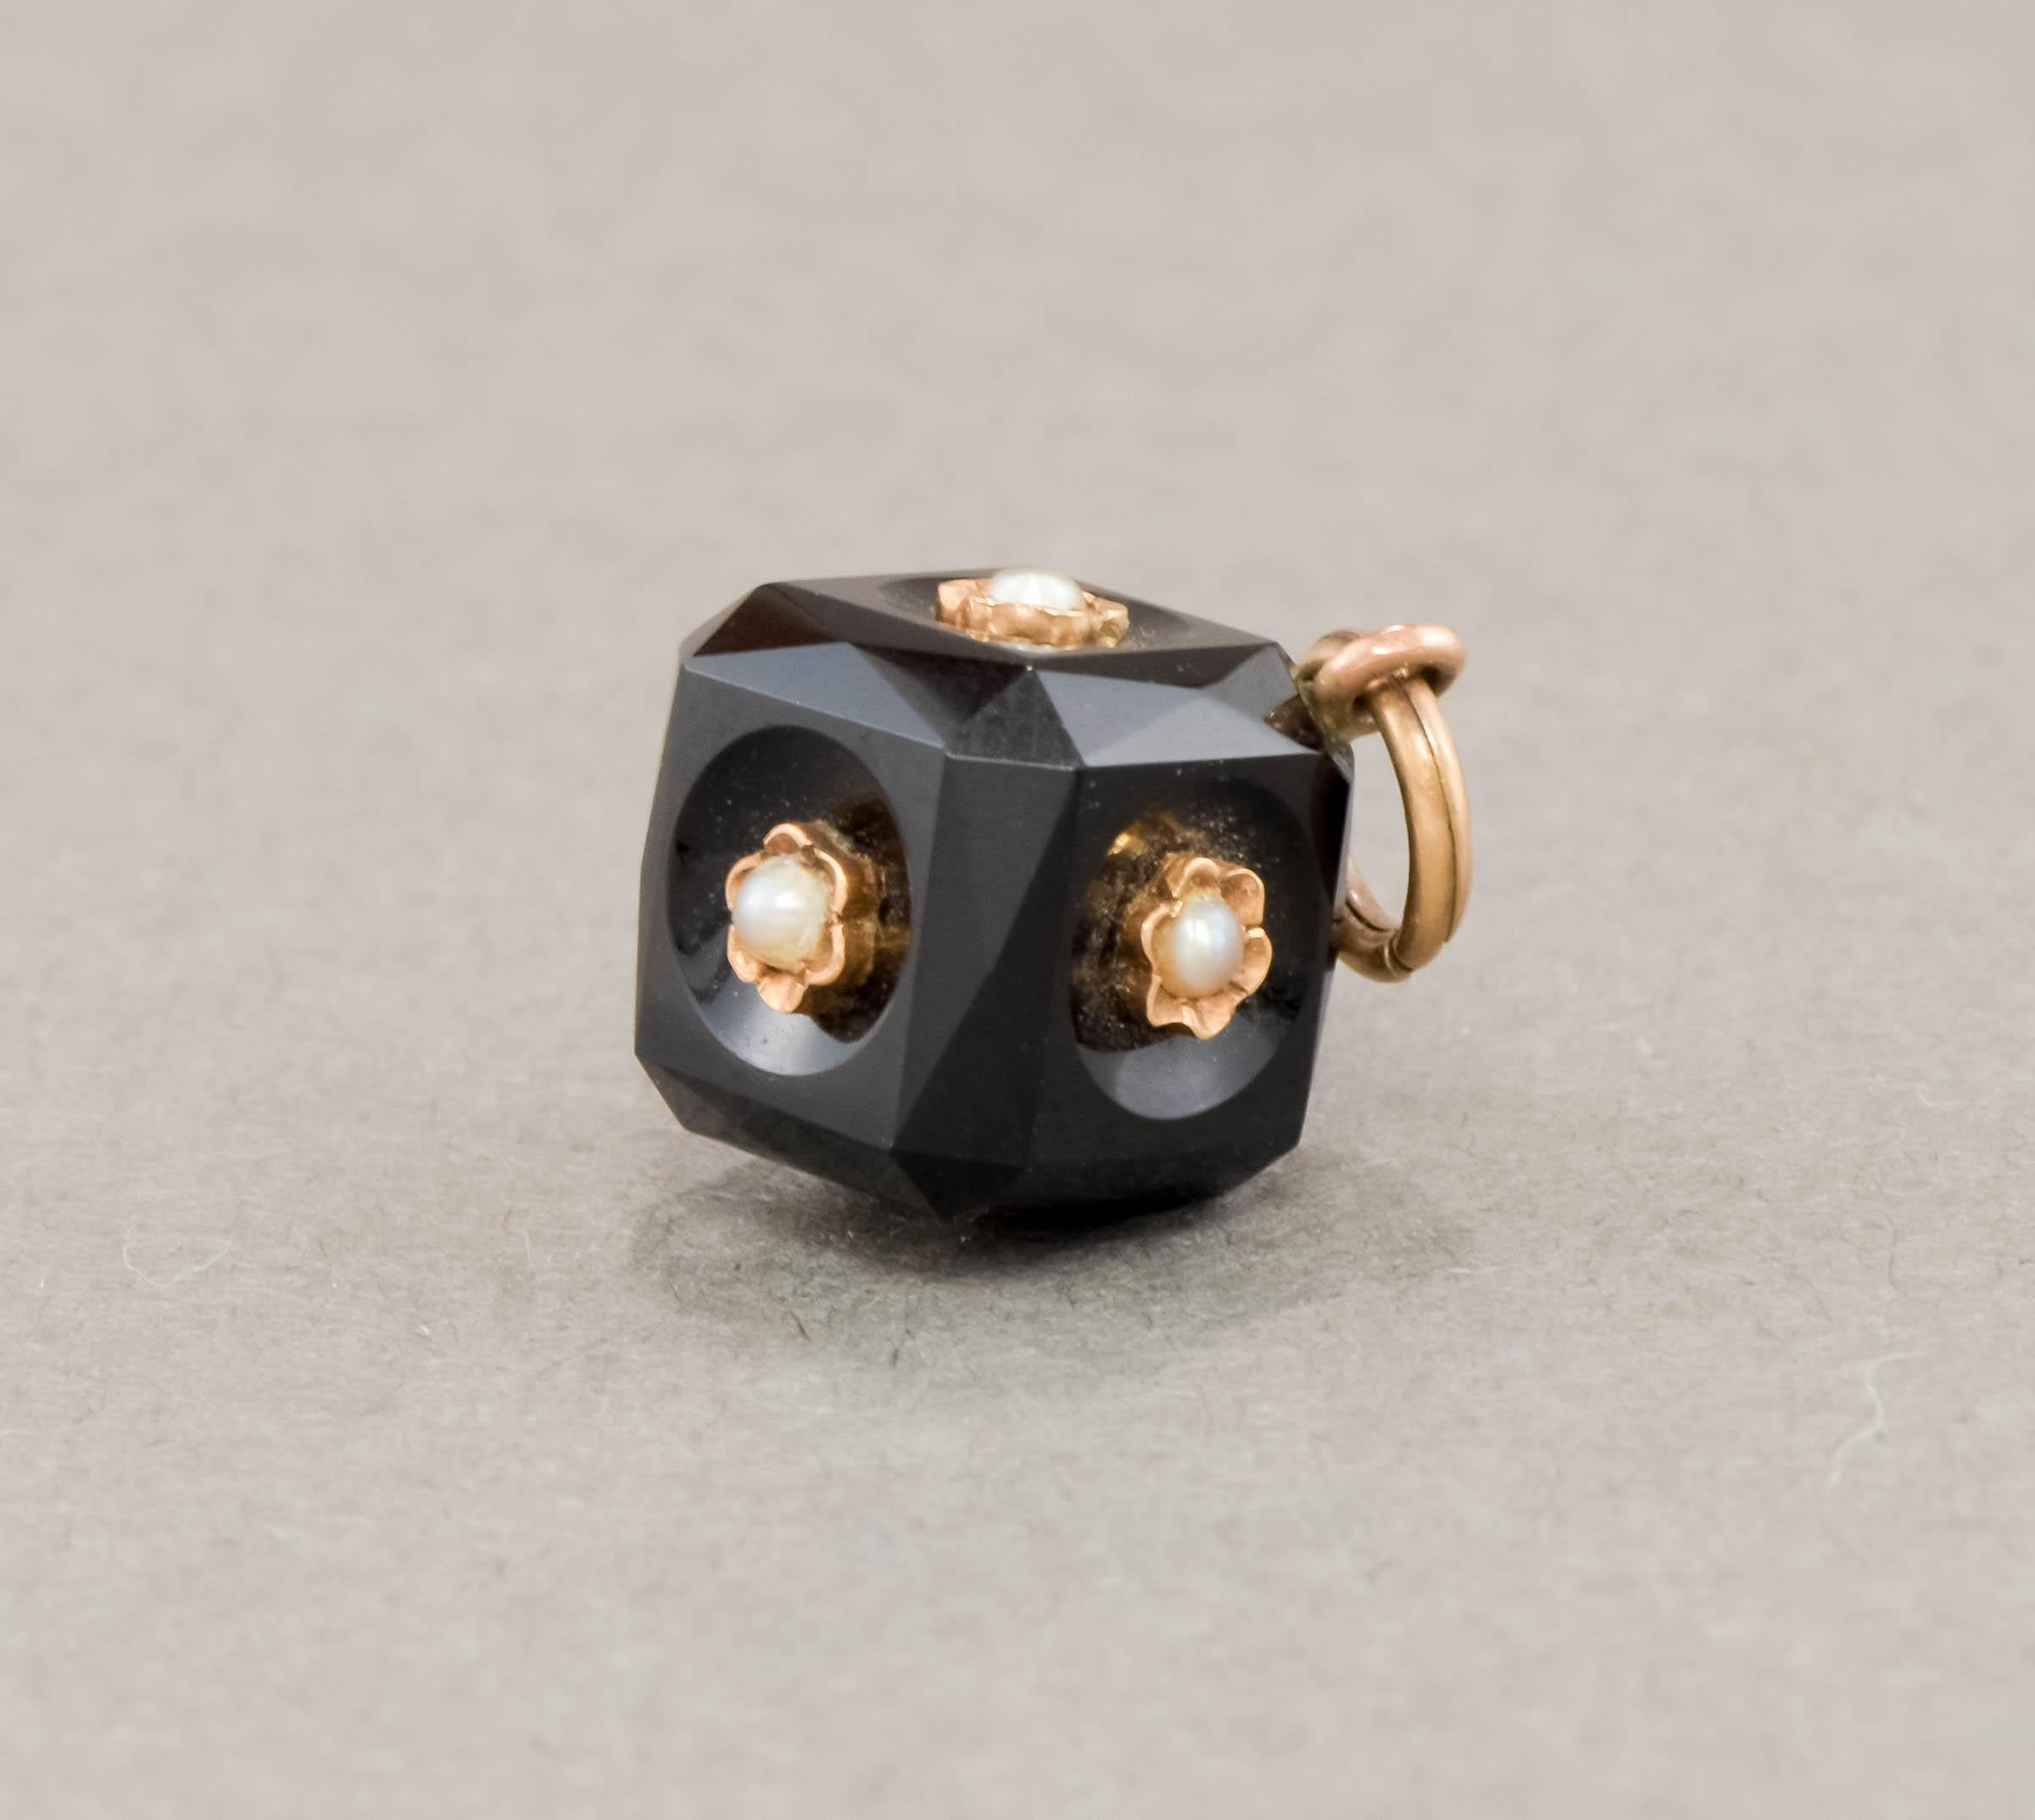 In wonderful original condition, this elegant Victorian era onyx cube with flower blossoms was originally a pocket watch fob.  Perhaps a mourning piece, given the black onyx and the pearls which symbolized tears, it would have been suspended on a